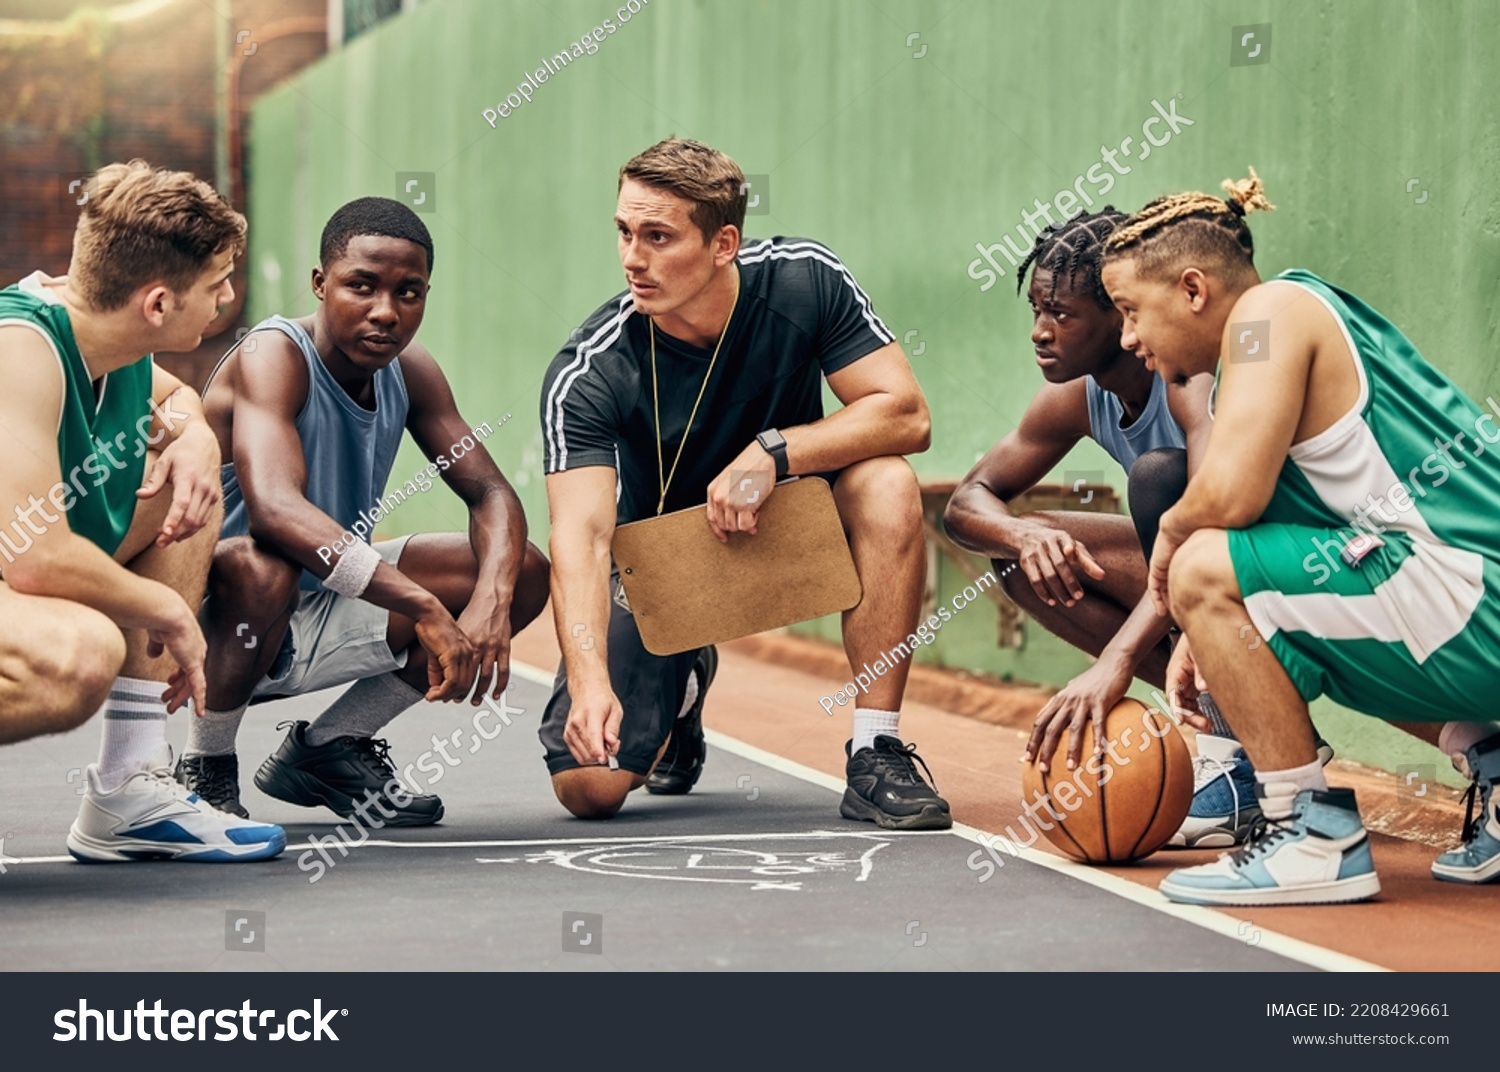 Basketball strategy, team sports and coach talking to USA sport group about coaching for game on court. Young athlete students in communication about idea during training for professional competition #2208429661